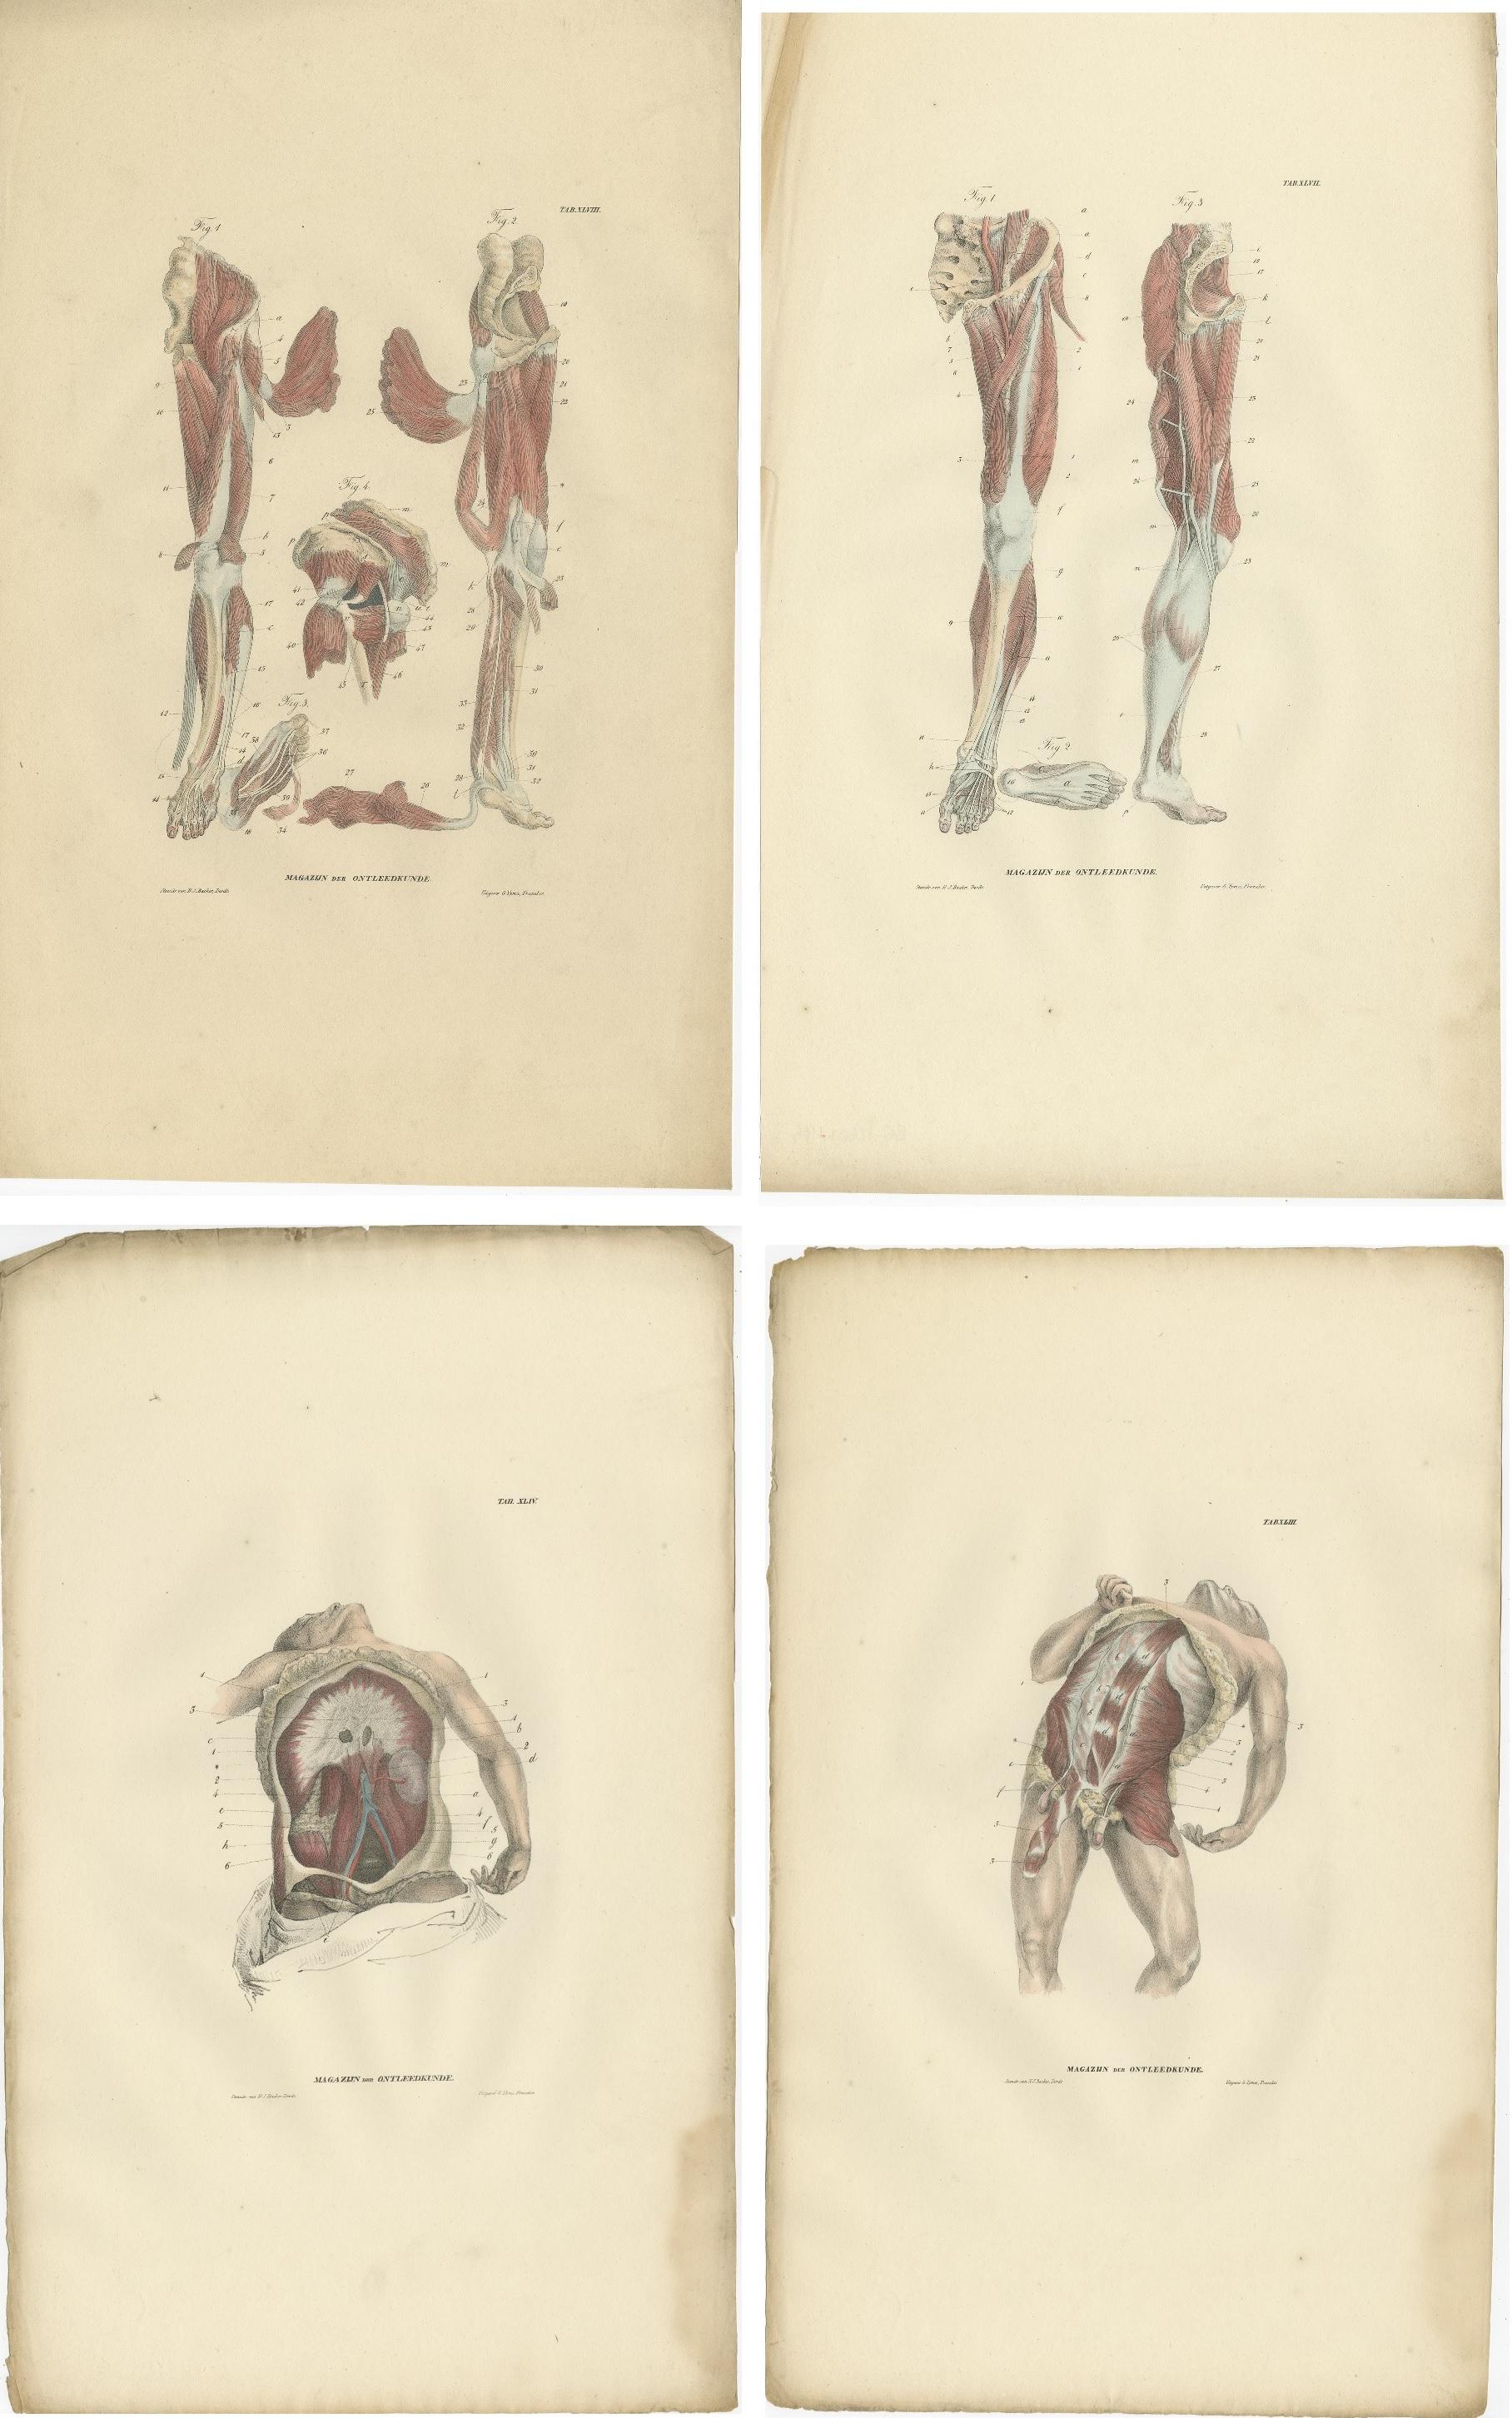 Set of 15 antique anatomy prints of the muscular system. These prints originate from 'Magazijn van ontleedkunde' by Dr. Th. Richter. Published, 1839.